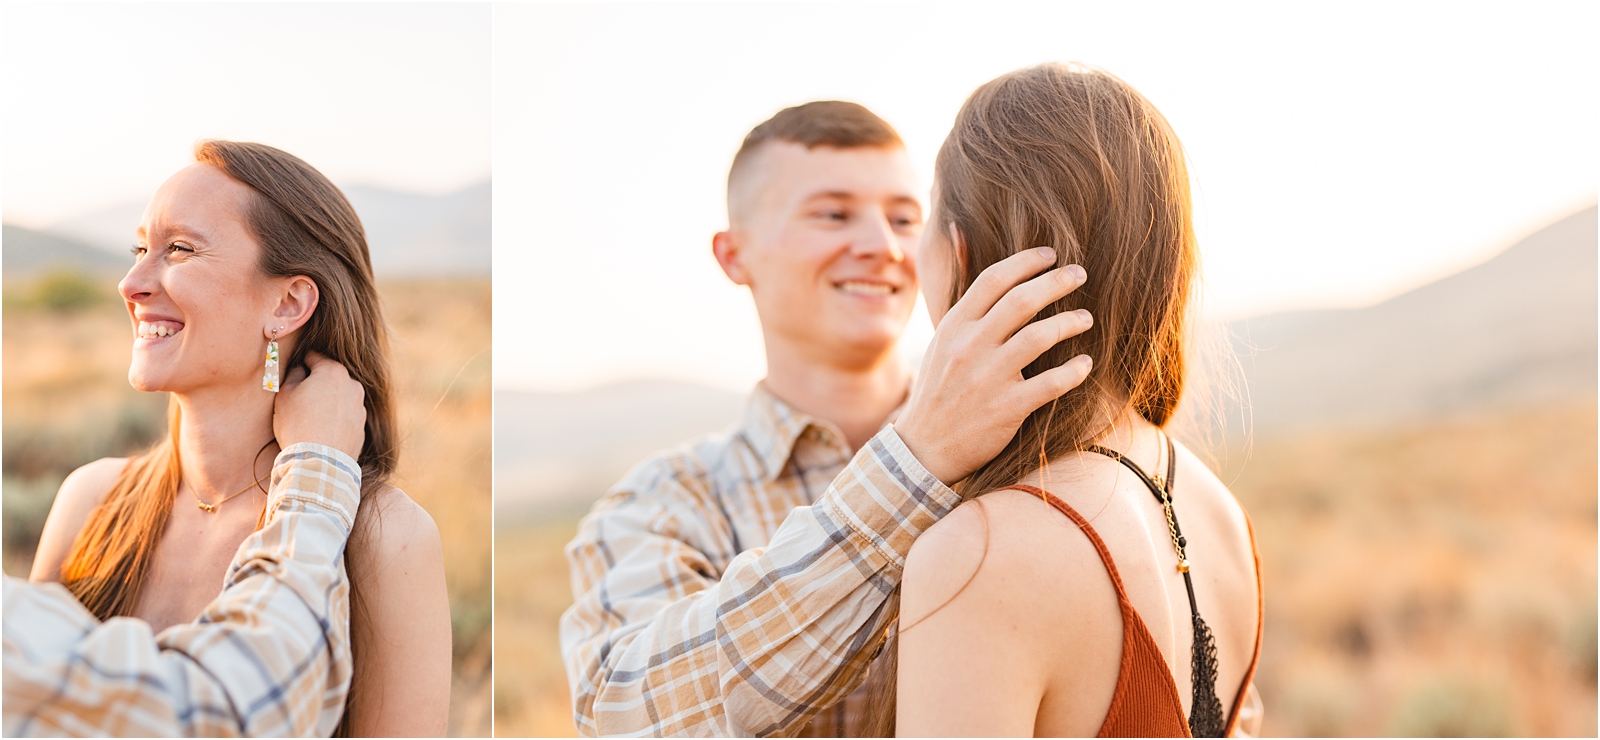 Couples' Photo Session in Boise Idaho at sunset.